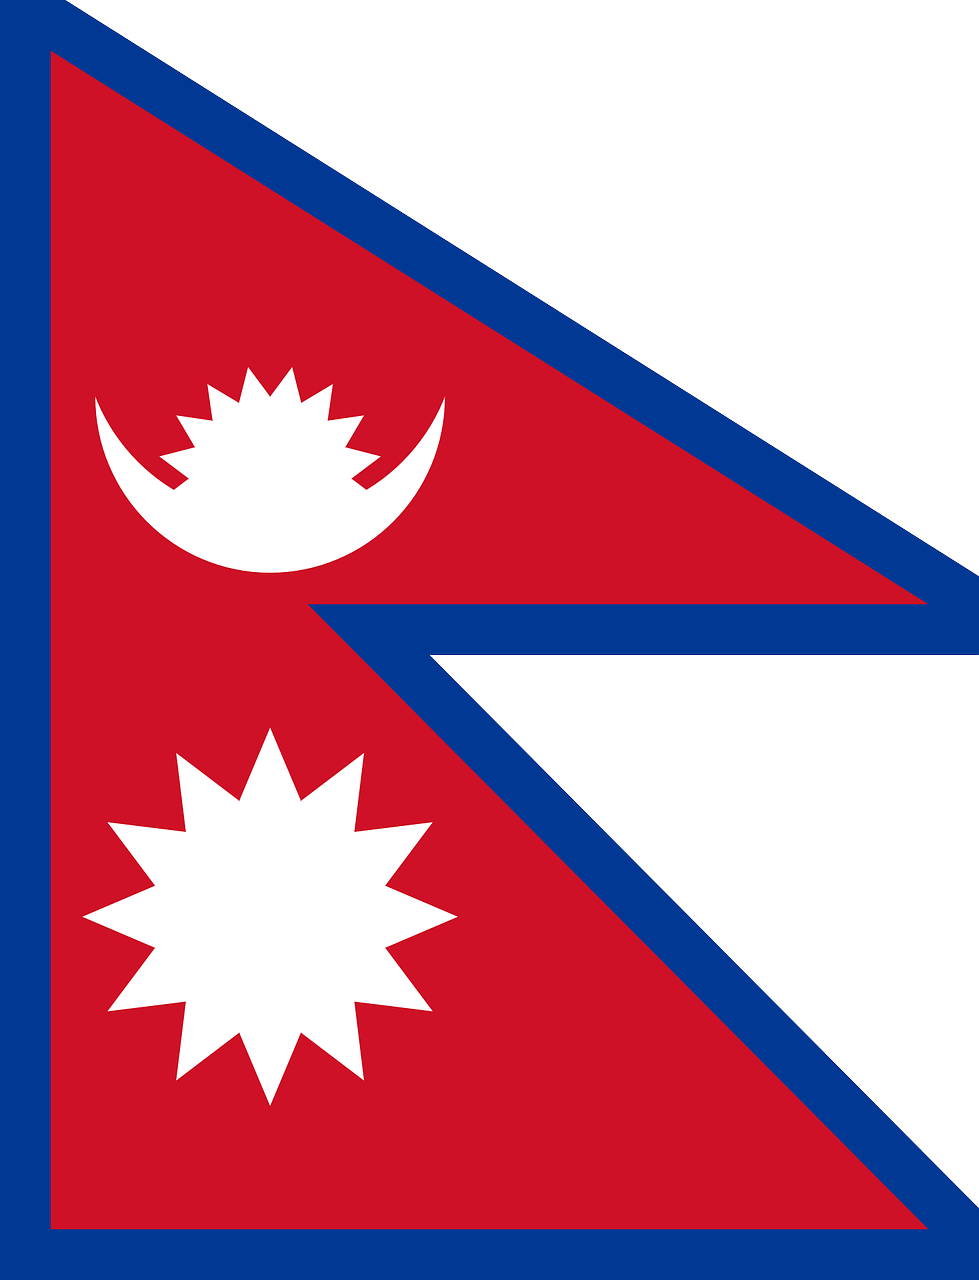 Nepal Communist Party has decided to amend the country’s citizenship law